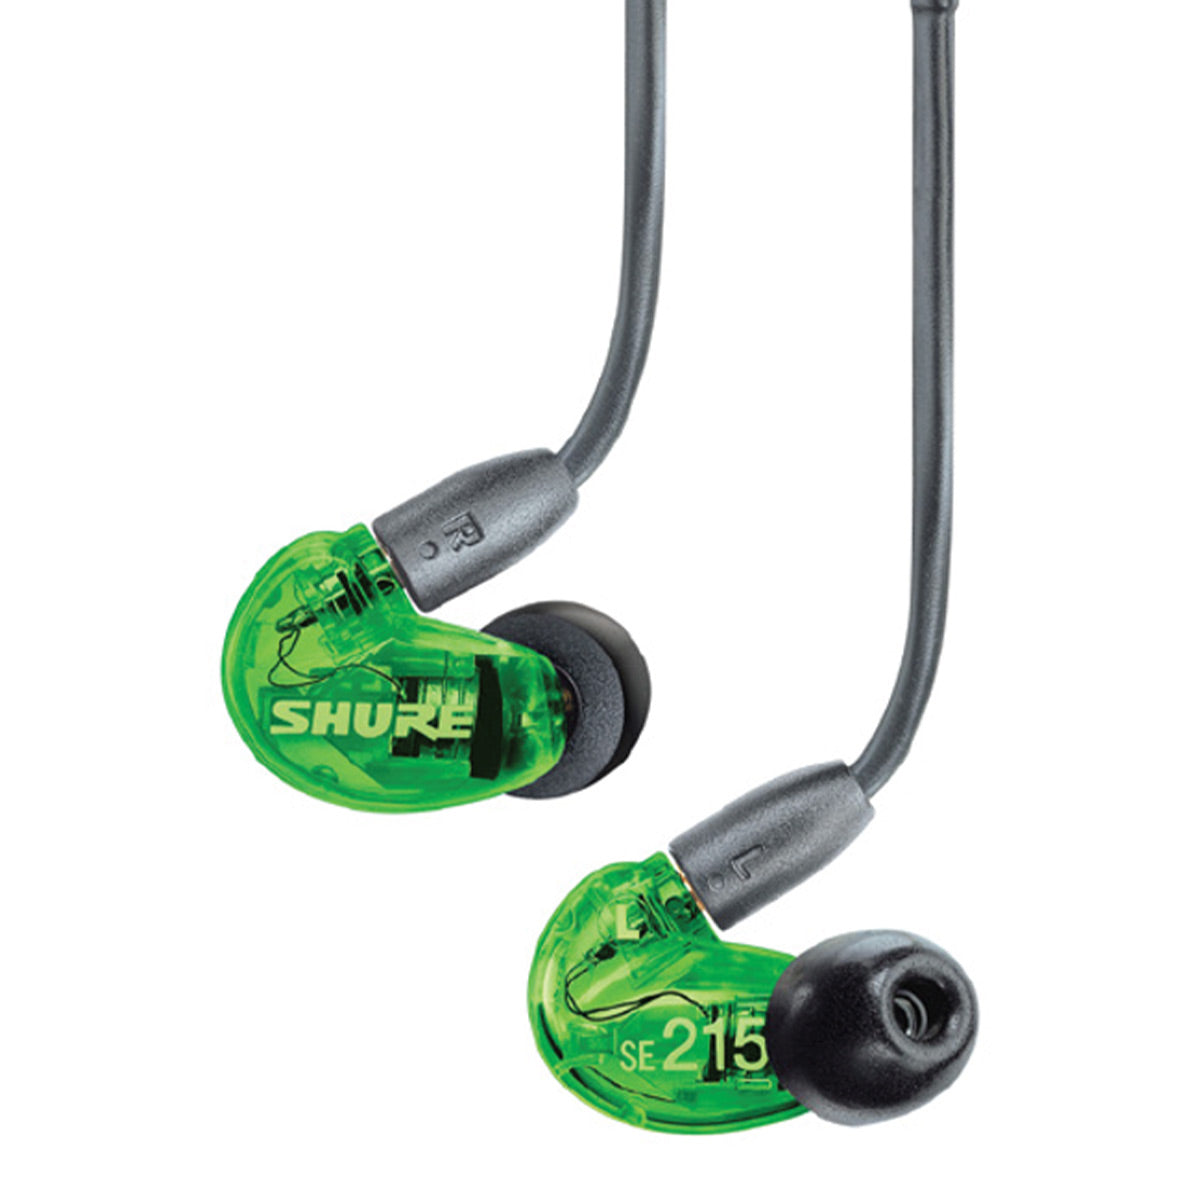 Shure SE215 Professional Sound Isolating Earphones (Limited